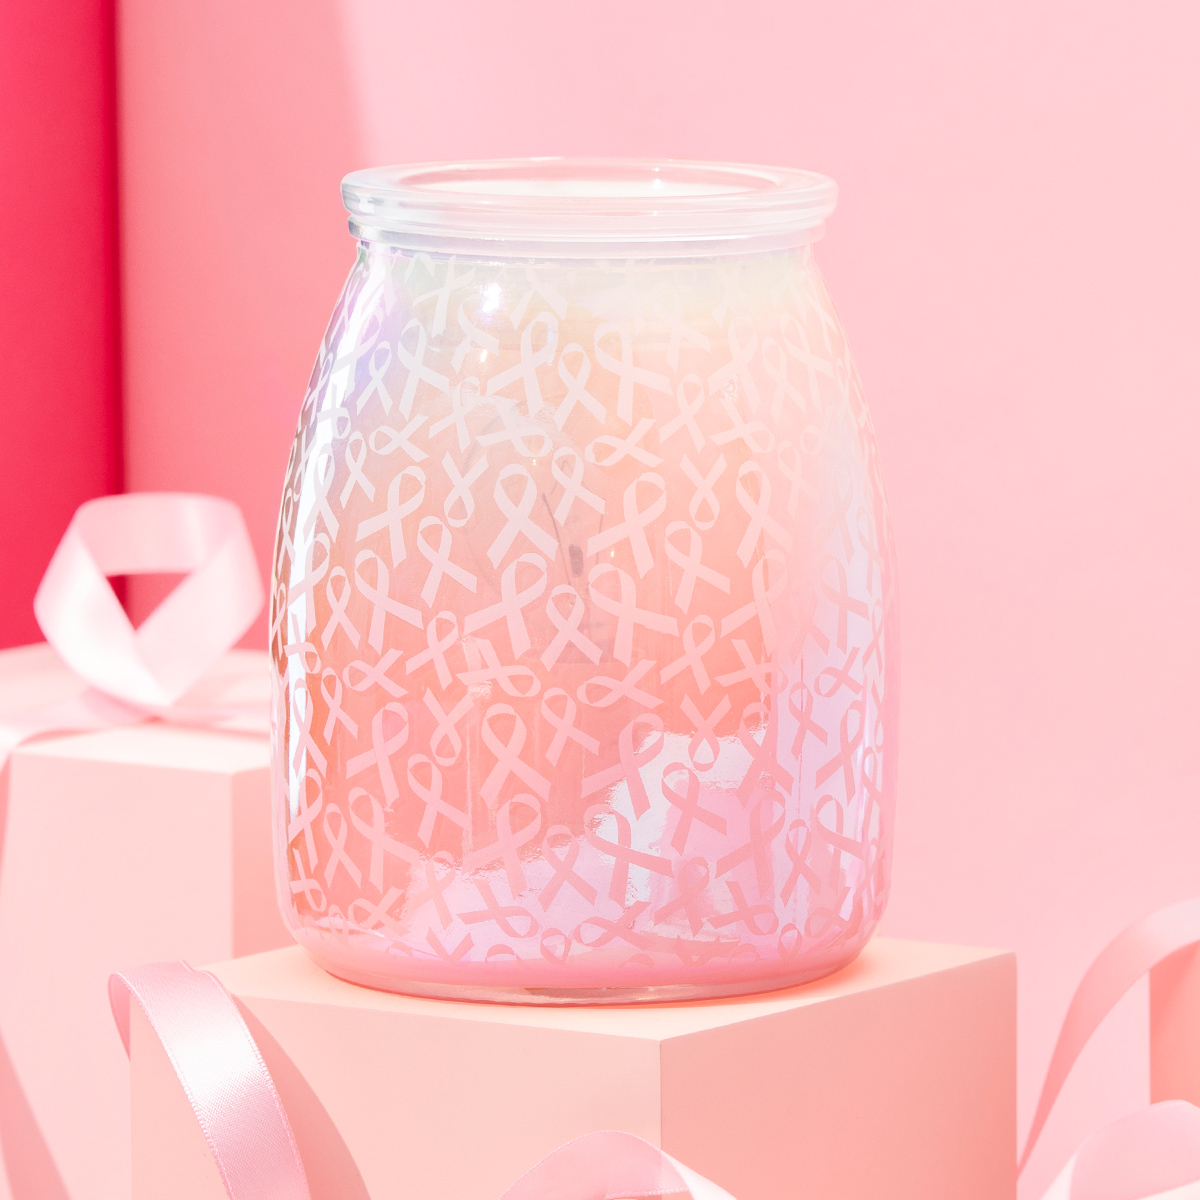 Scentsy's Hope, Strength & Love Warmer benefits National Breast Cancer Foundation